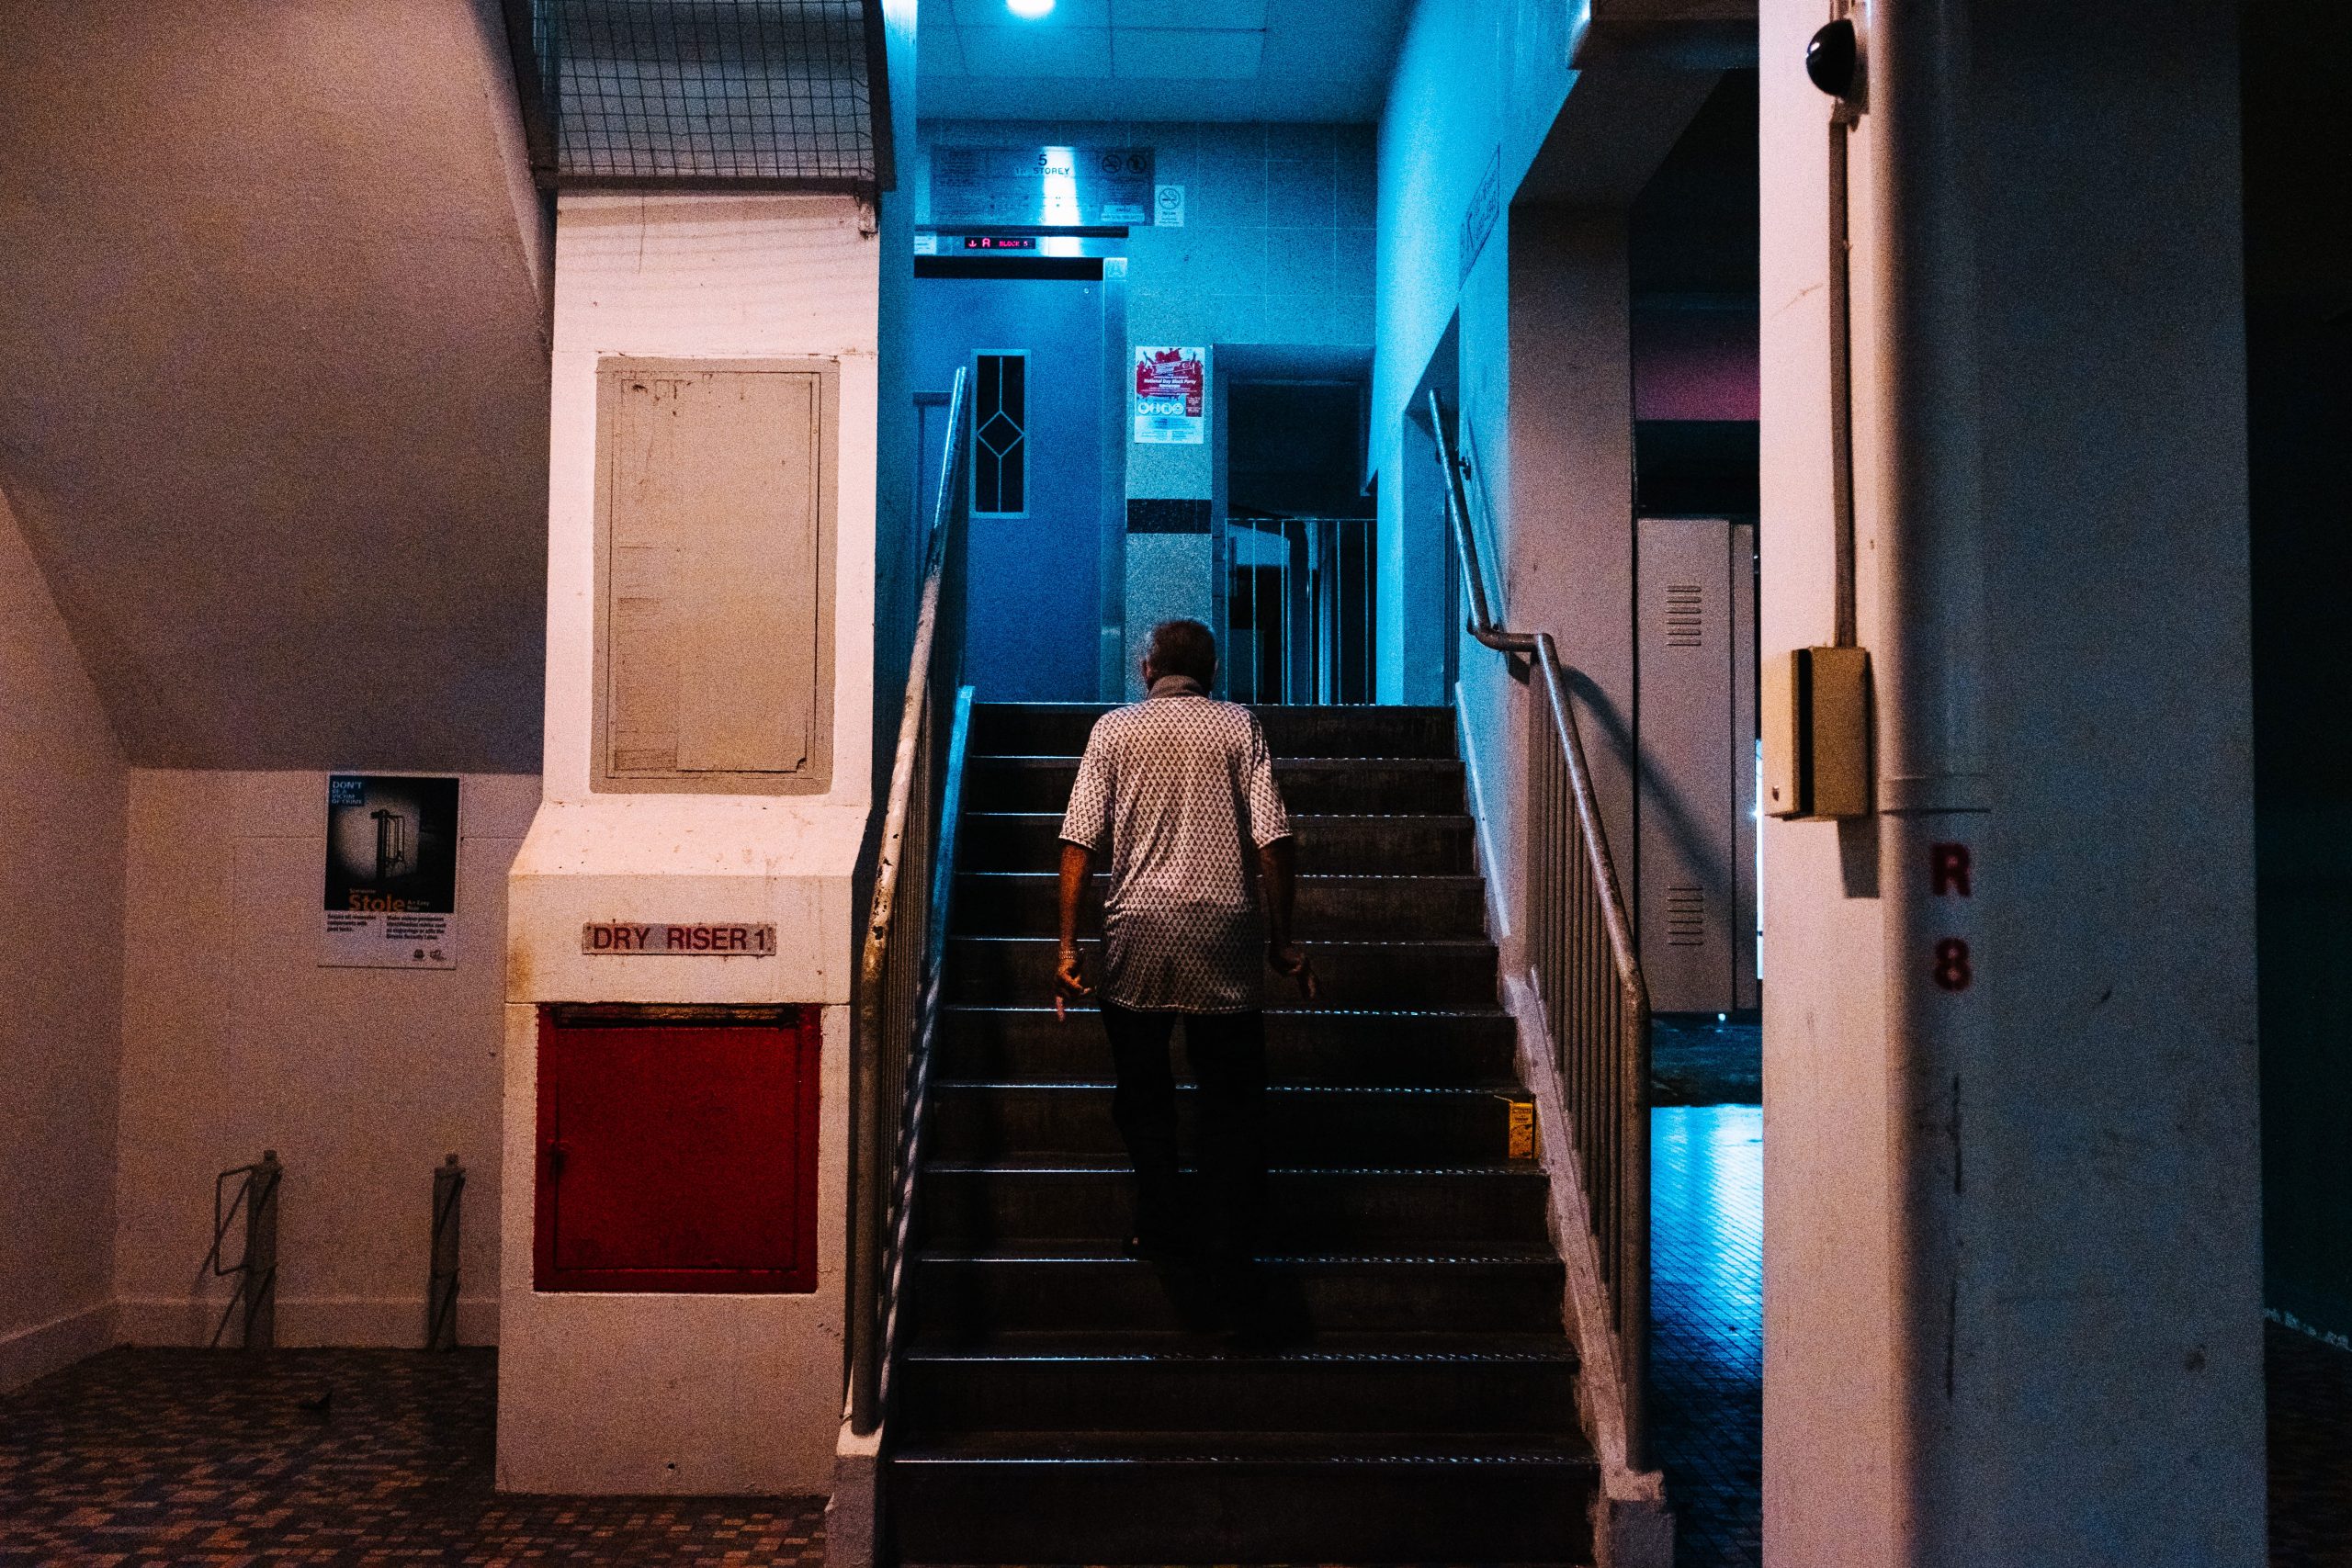 Singapore wallpaper, oldman, alone, lonely, stairs, ghetto, rundown, up